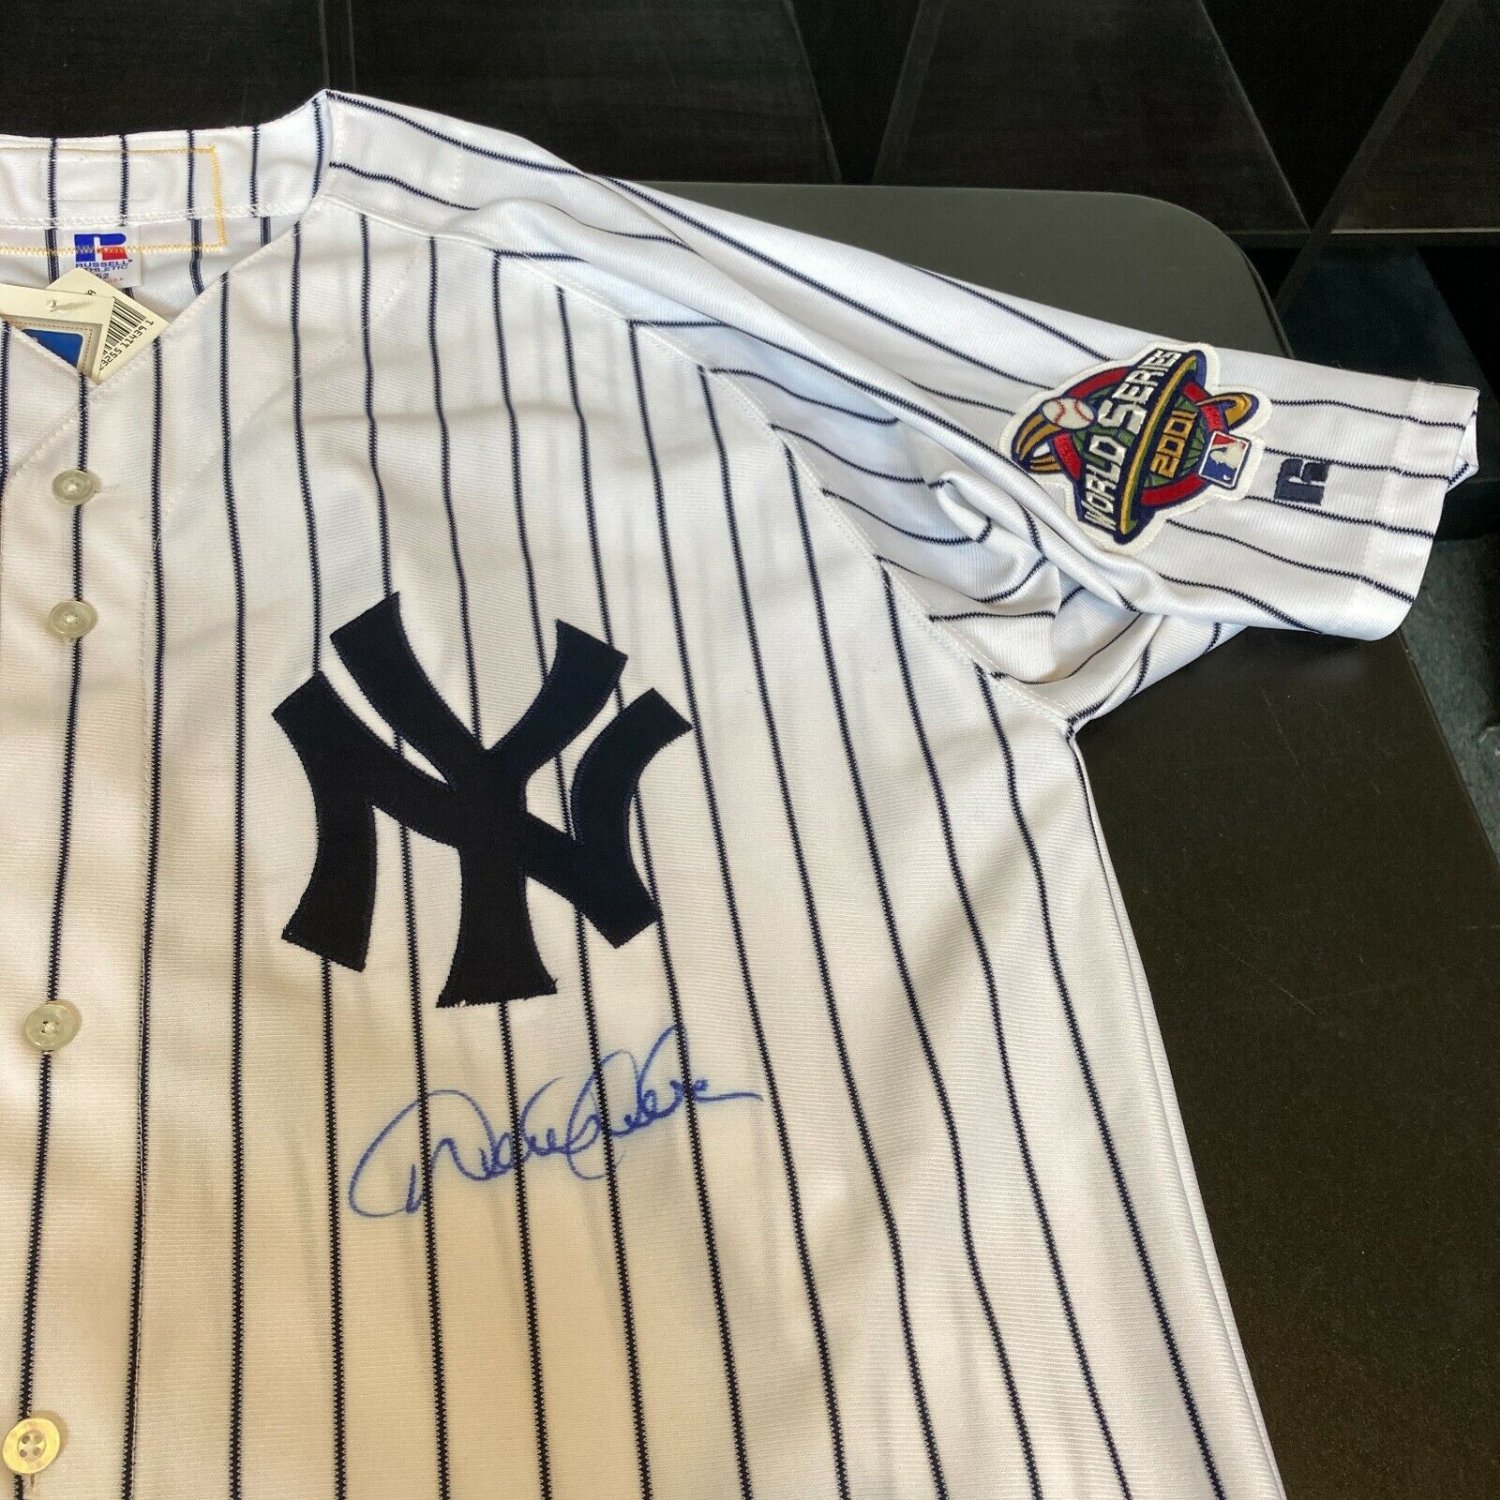 Derek Jeter Autographed and Framed White Yankees Jersey